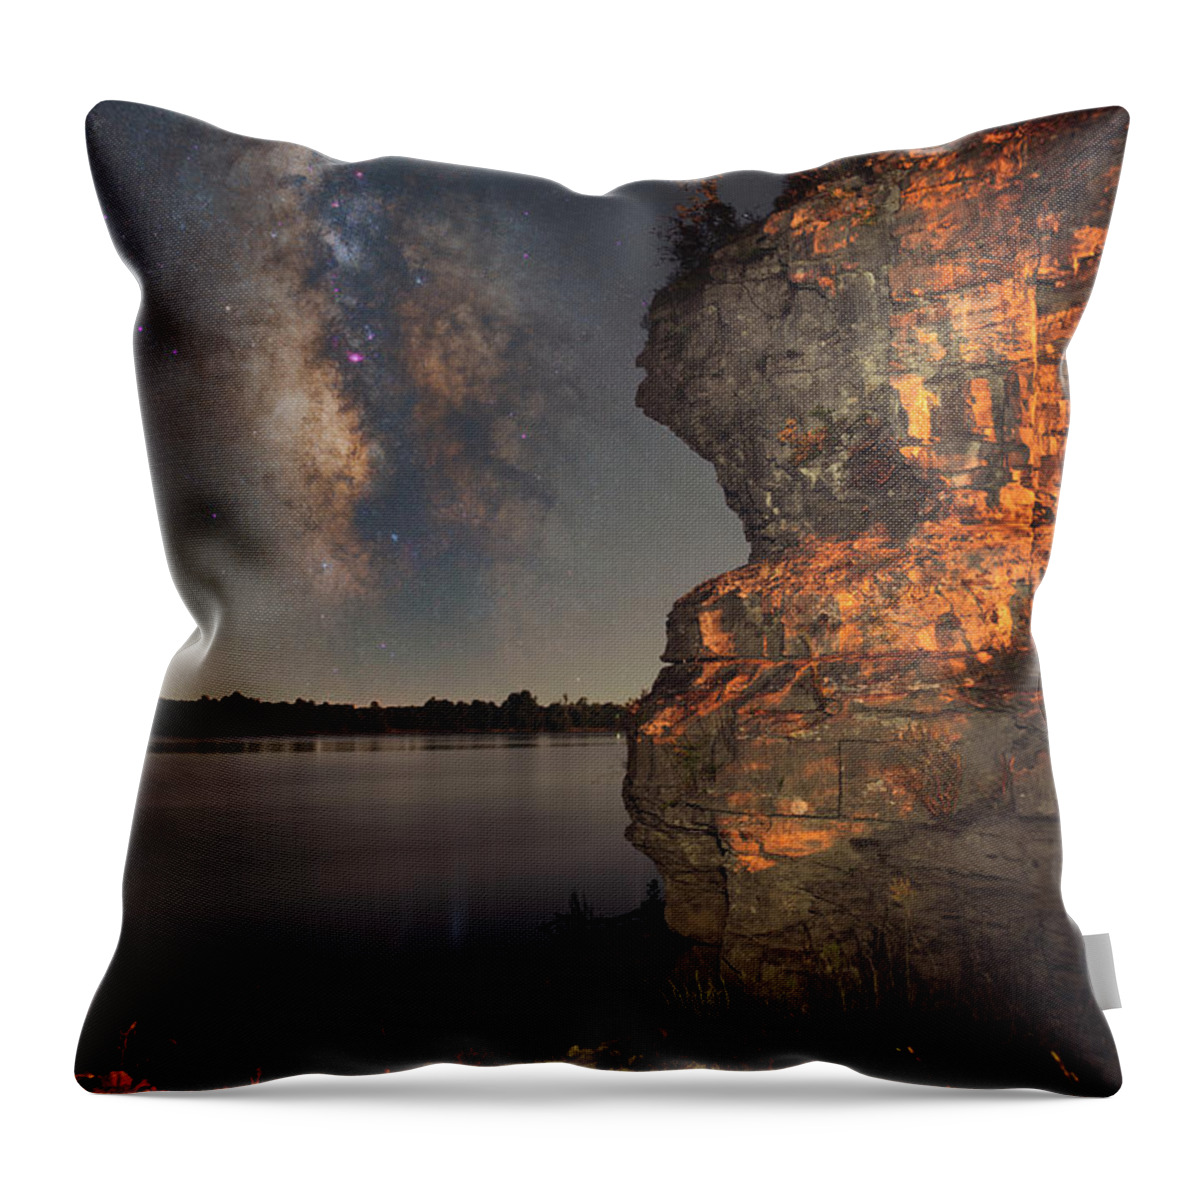 Nightscape Throw Pillow featuring the photograph Cave In Rock Bluff by Grant Twiss